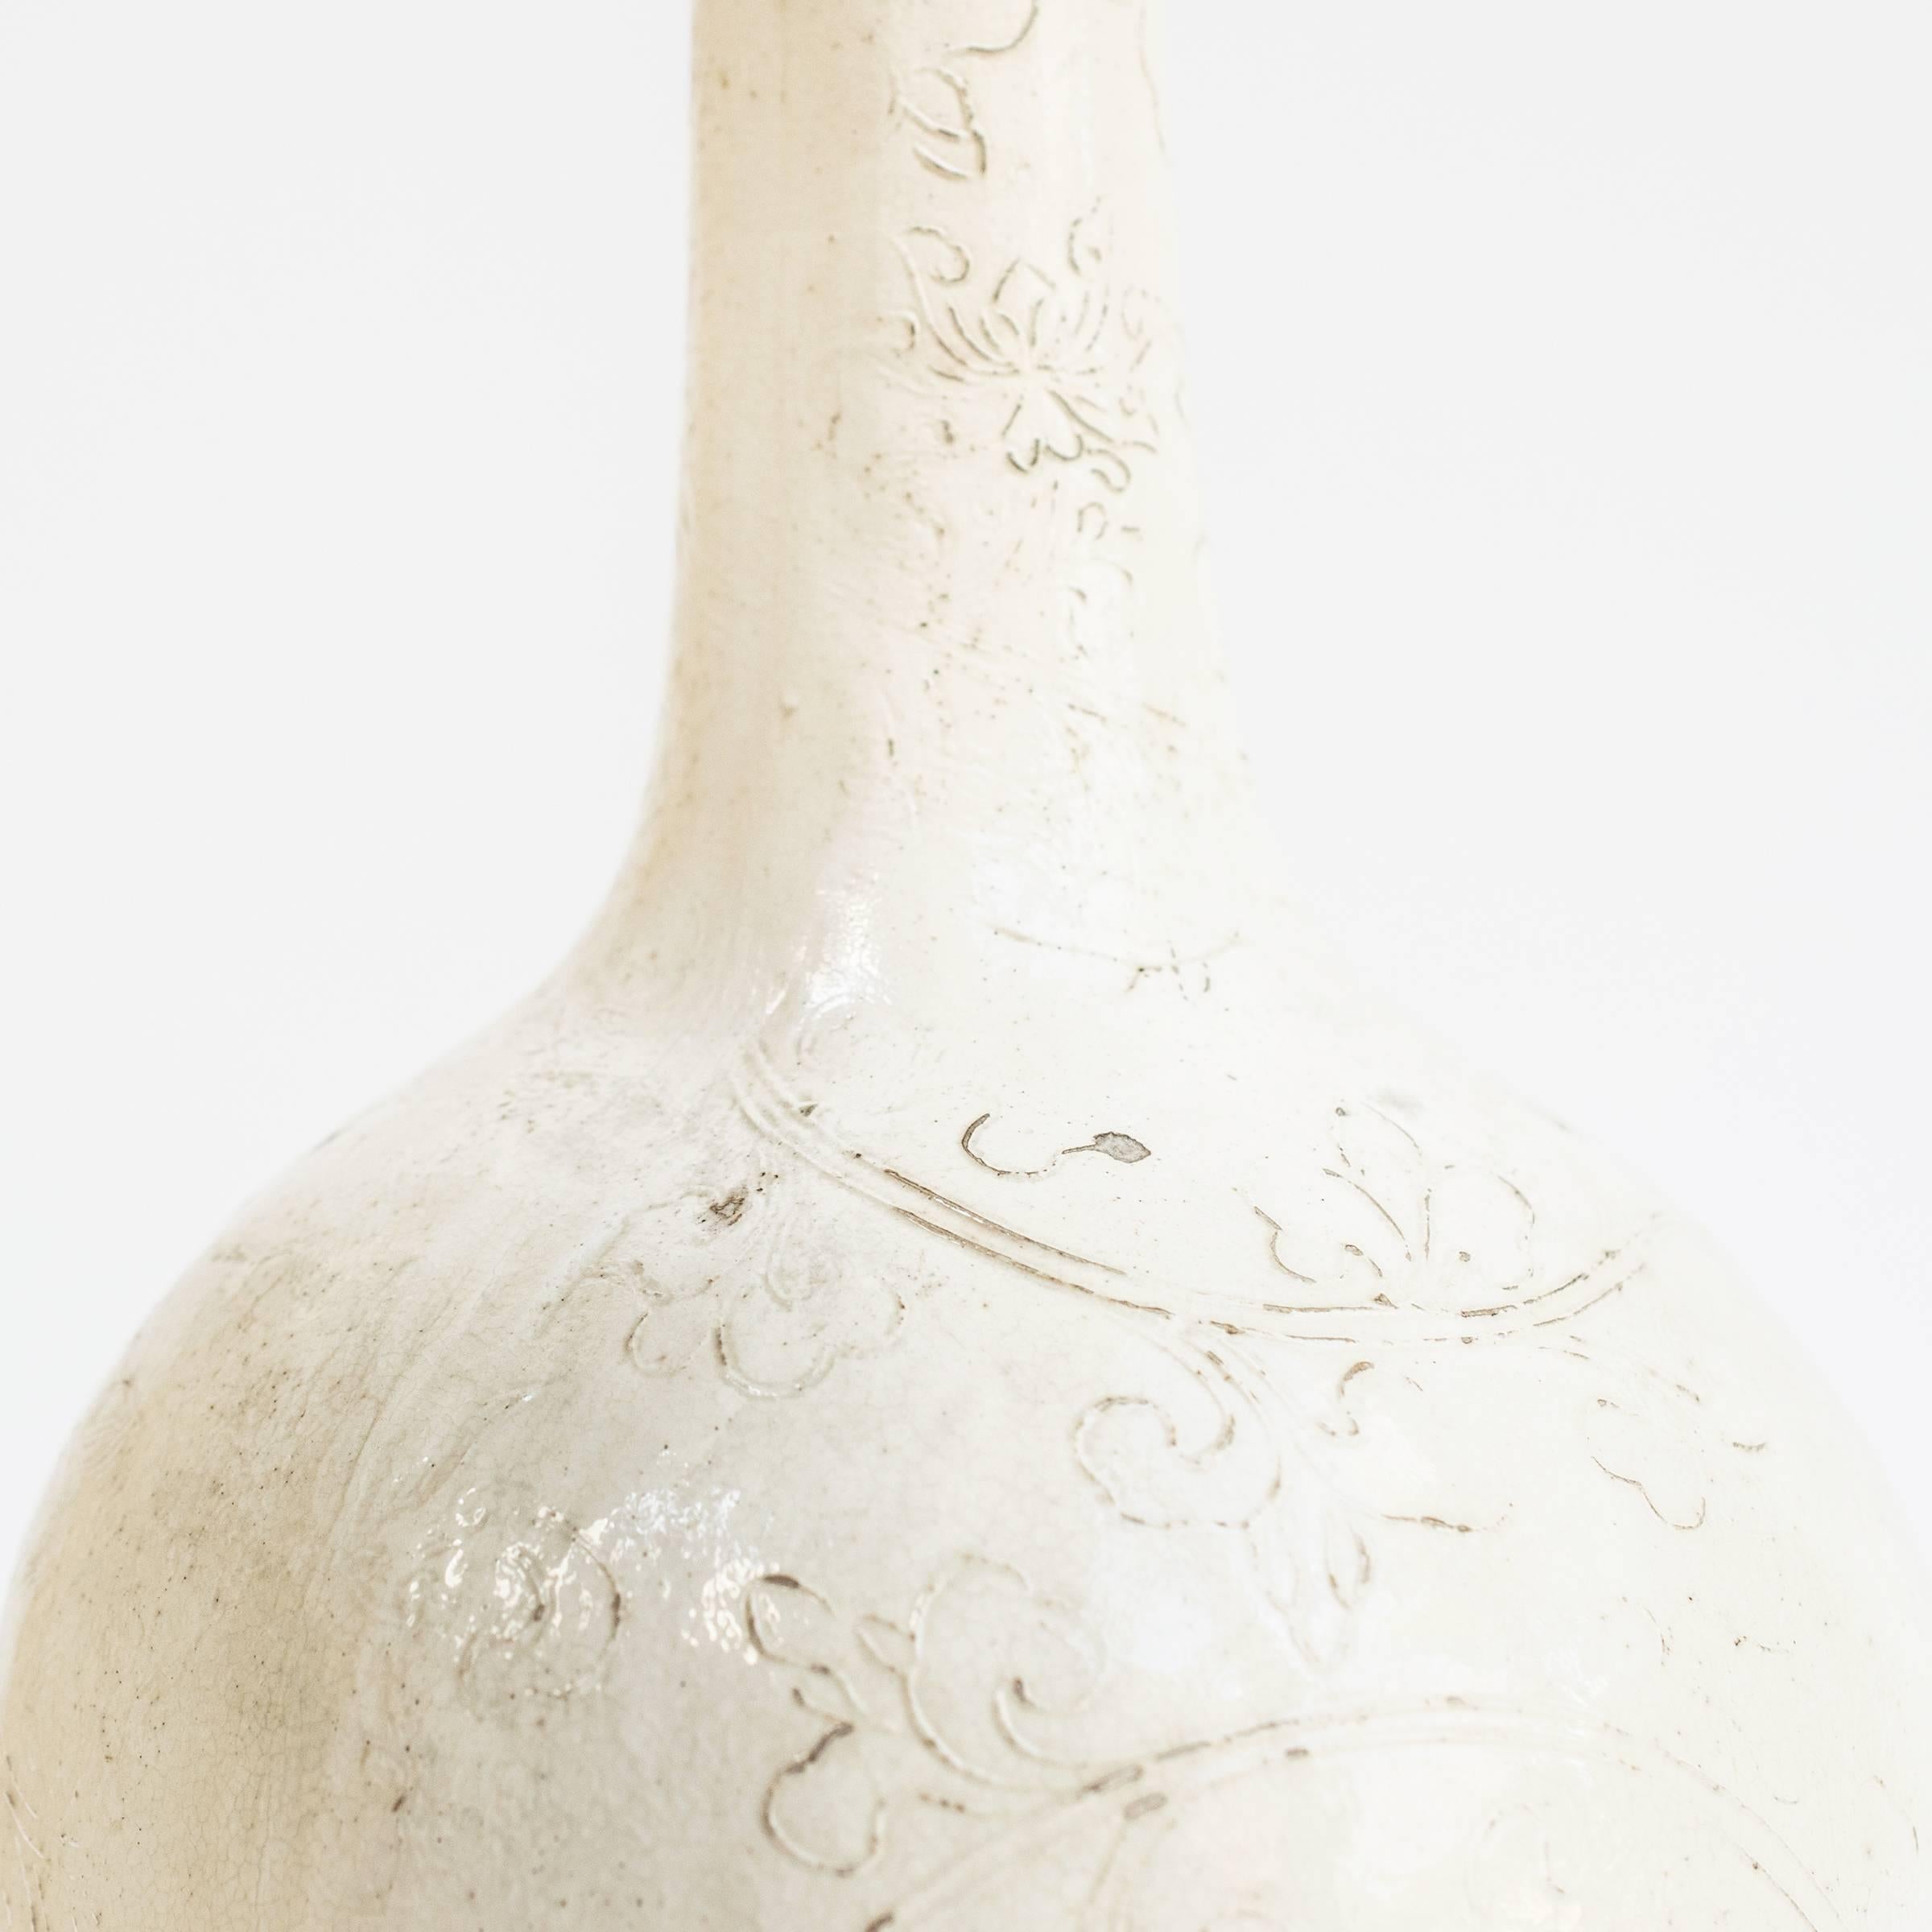 18th Century and Earlier 11th Century Chinese Dingyao Porcelain Vase